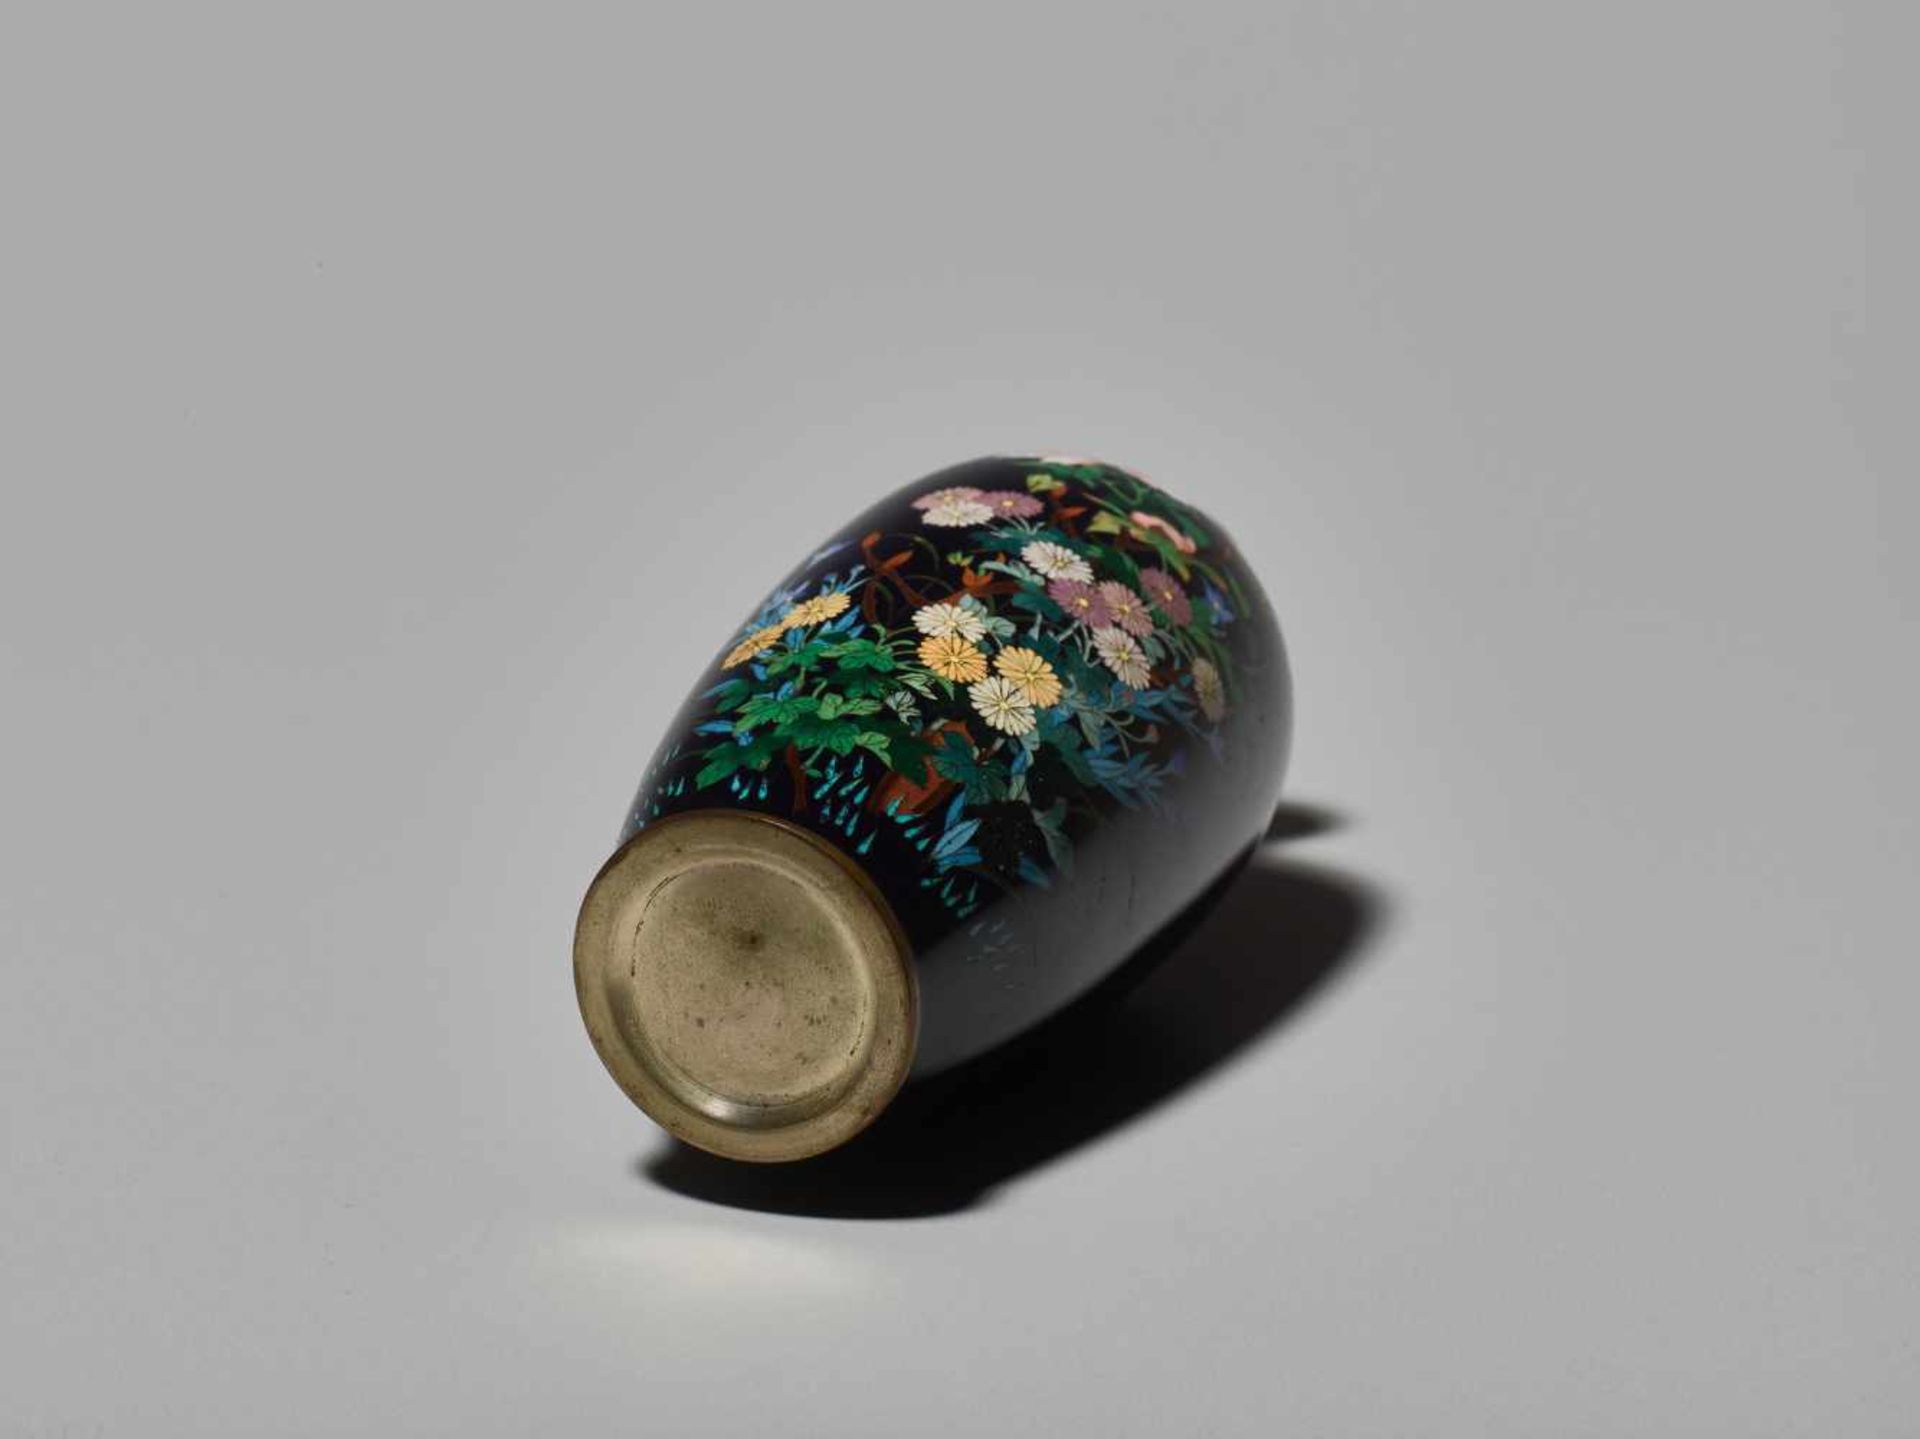 A JAPANESE CLOISONNÉ ENAMEL VASE WITH KIKU AND FUYO BLOSSOMS Cloisonné with colored enamelsJapan, - Image 3 of 6